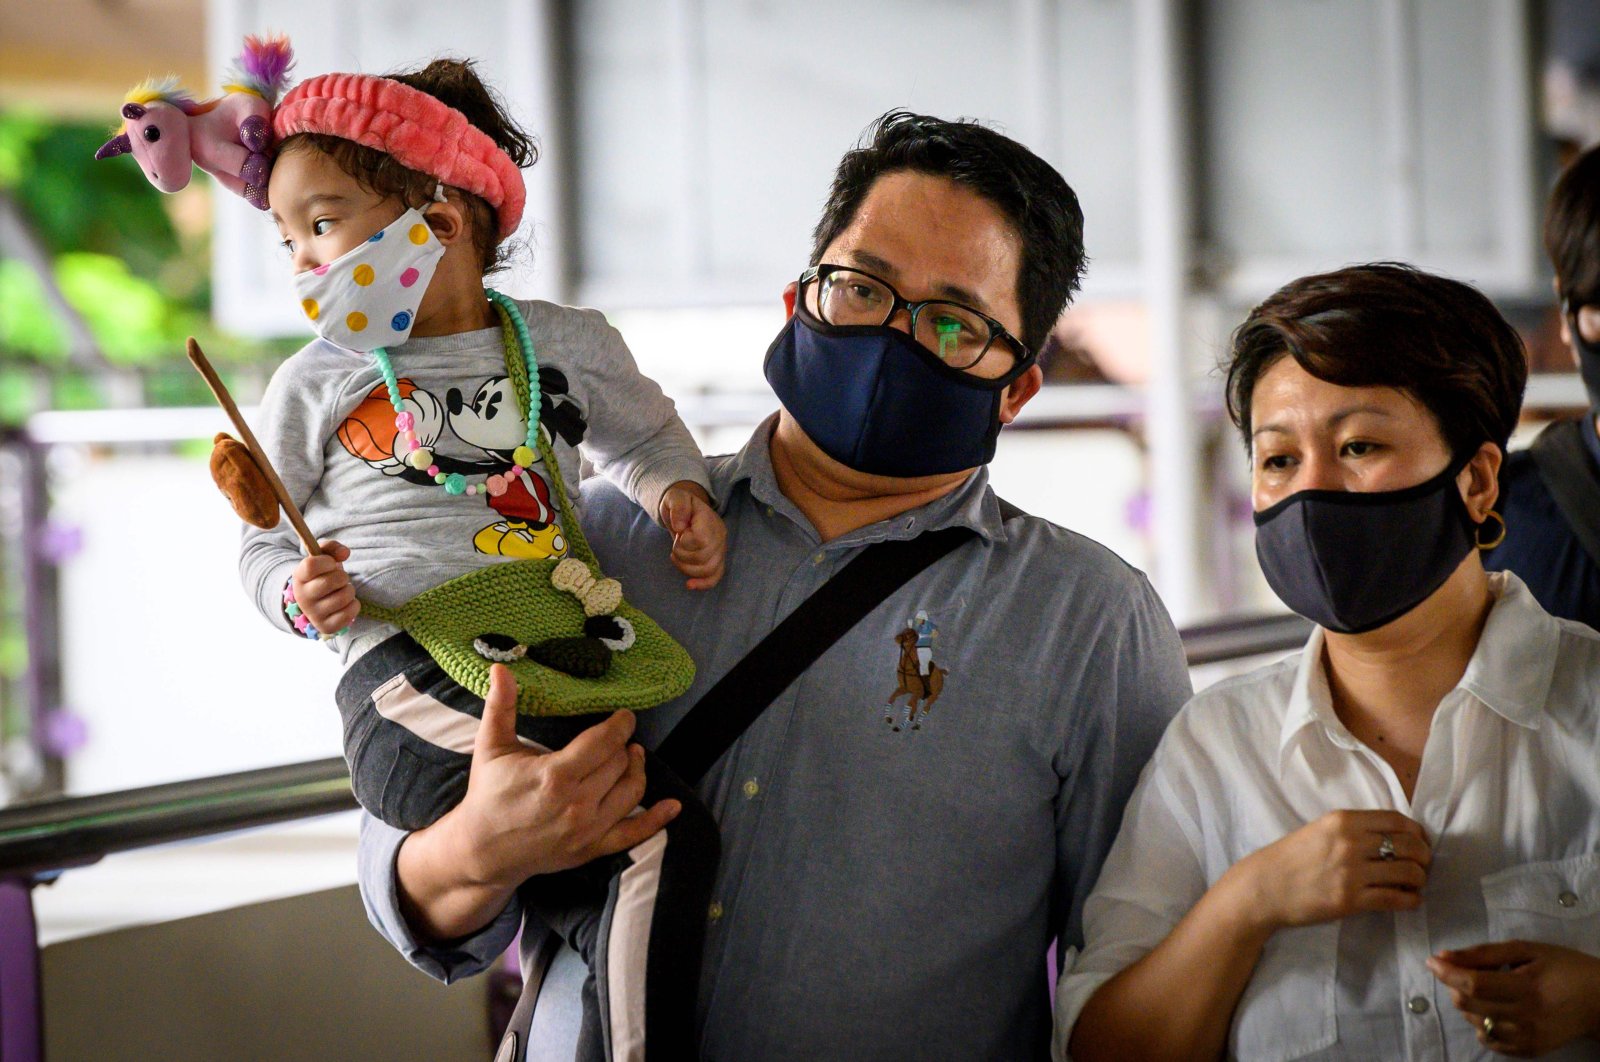 A child wearing a face mask is carried into a train station at rush hour in Bangkok, Thailand, as Thais continued their return to work following the lifting of restrictions to halt the spread of the coronavirus, May 25, 2020. (AFP Photo)